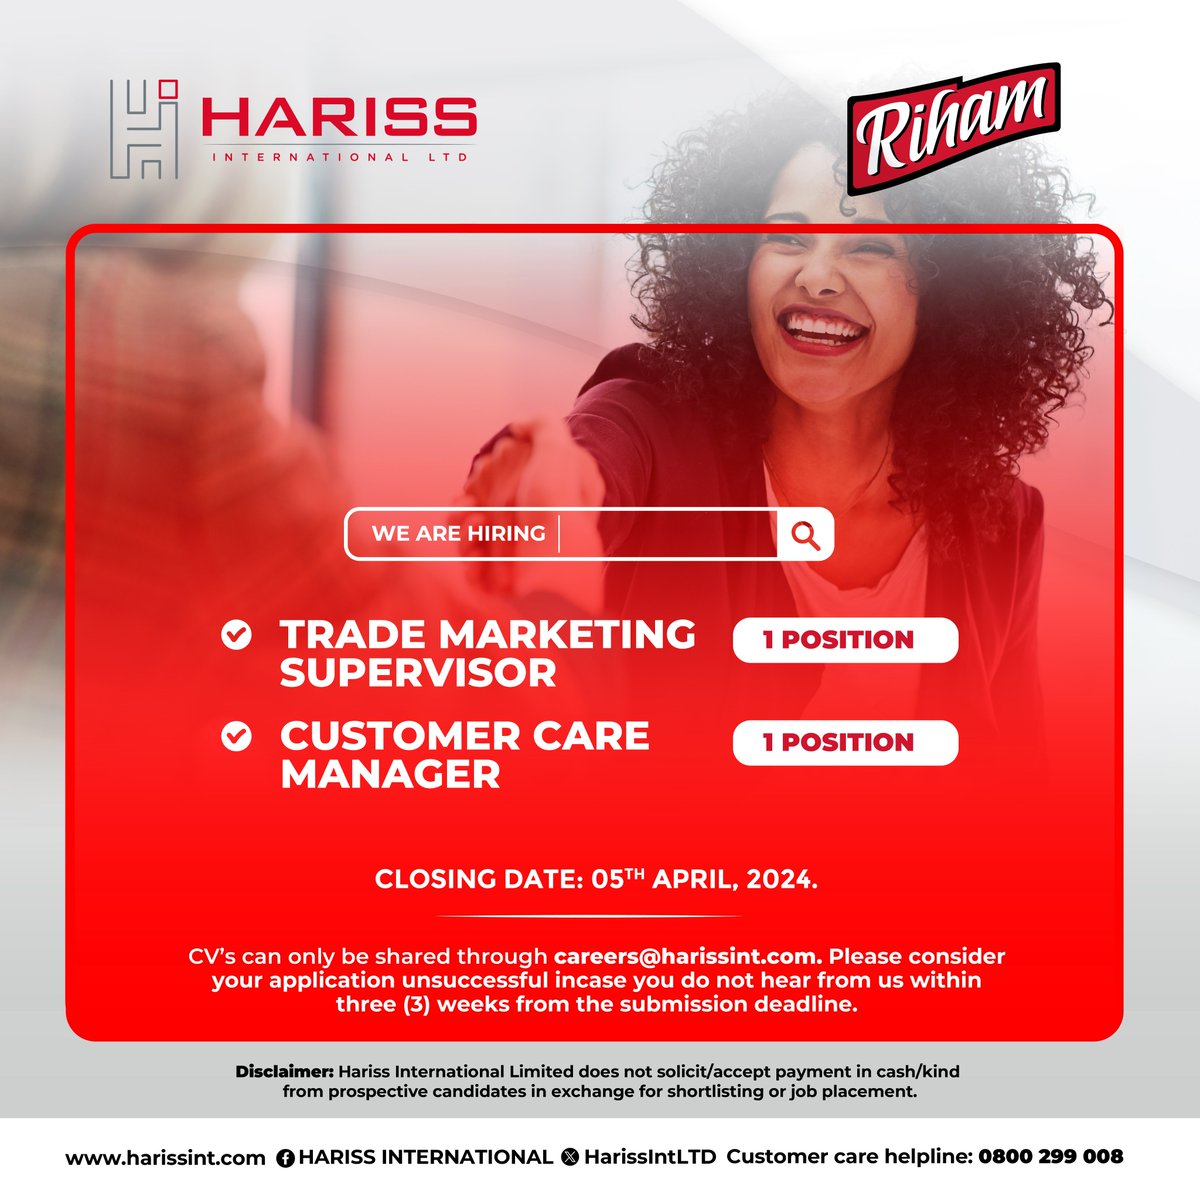 Join our growing team! We are looking for a Customer Care Manager (1) and a Trade Marketing Supervisor (1). Send your CV to careers@harissint.com. Apply now or share with someone who might be interested.